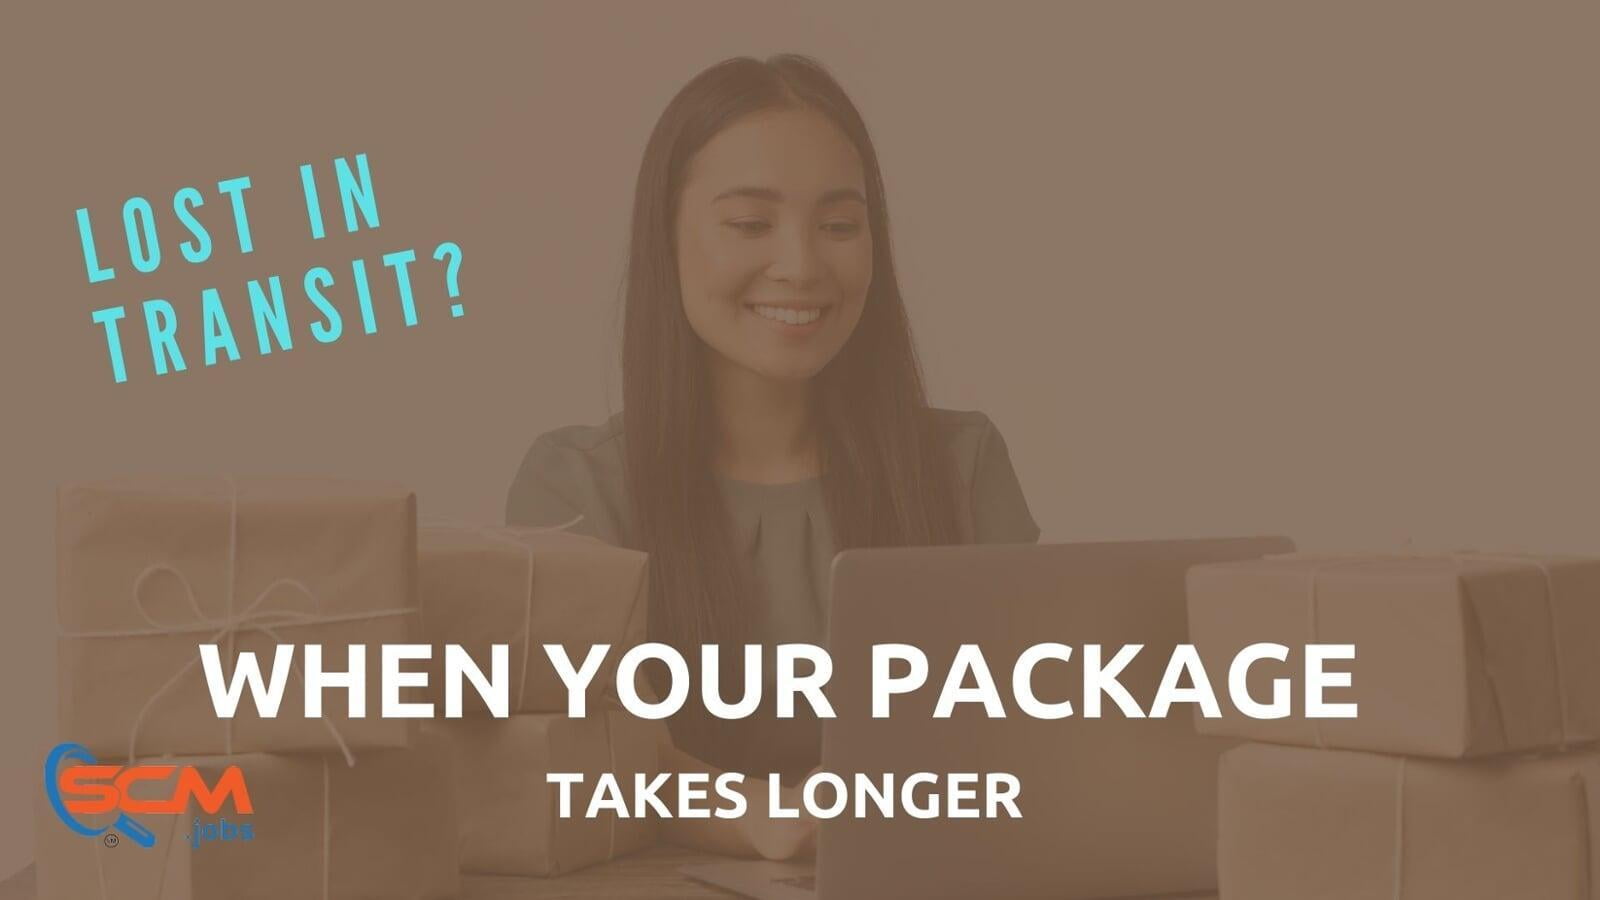 Lost in Transit? What to Do When Your Package Takes Longer Than Expected at the Distribution Center